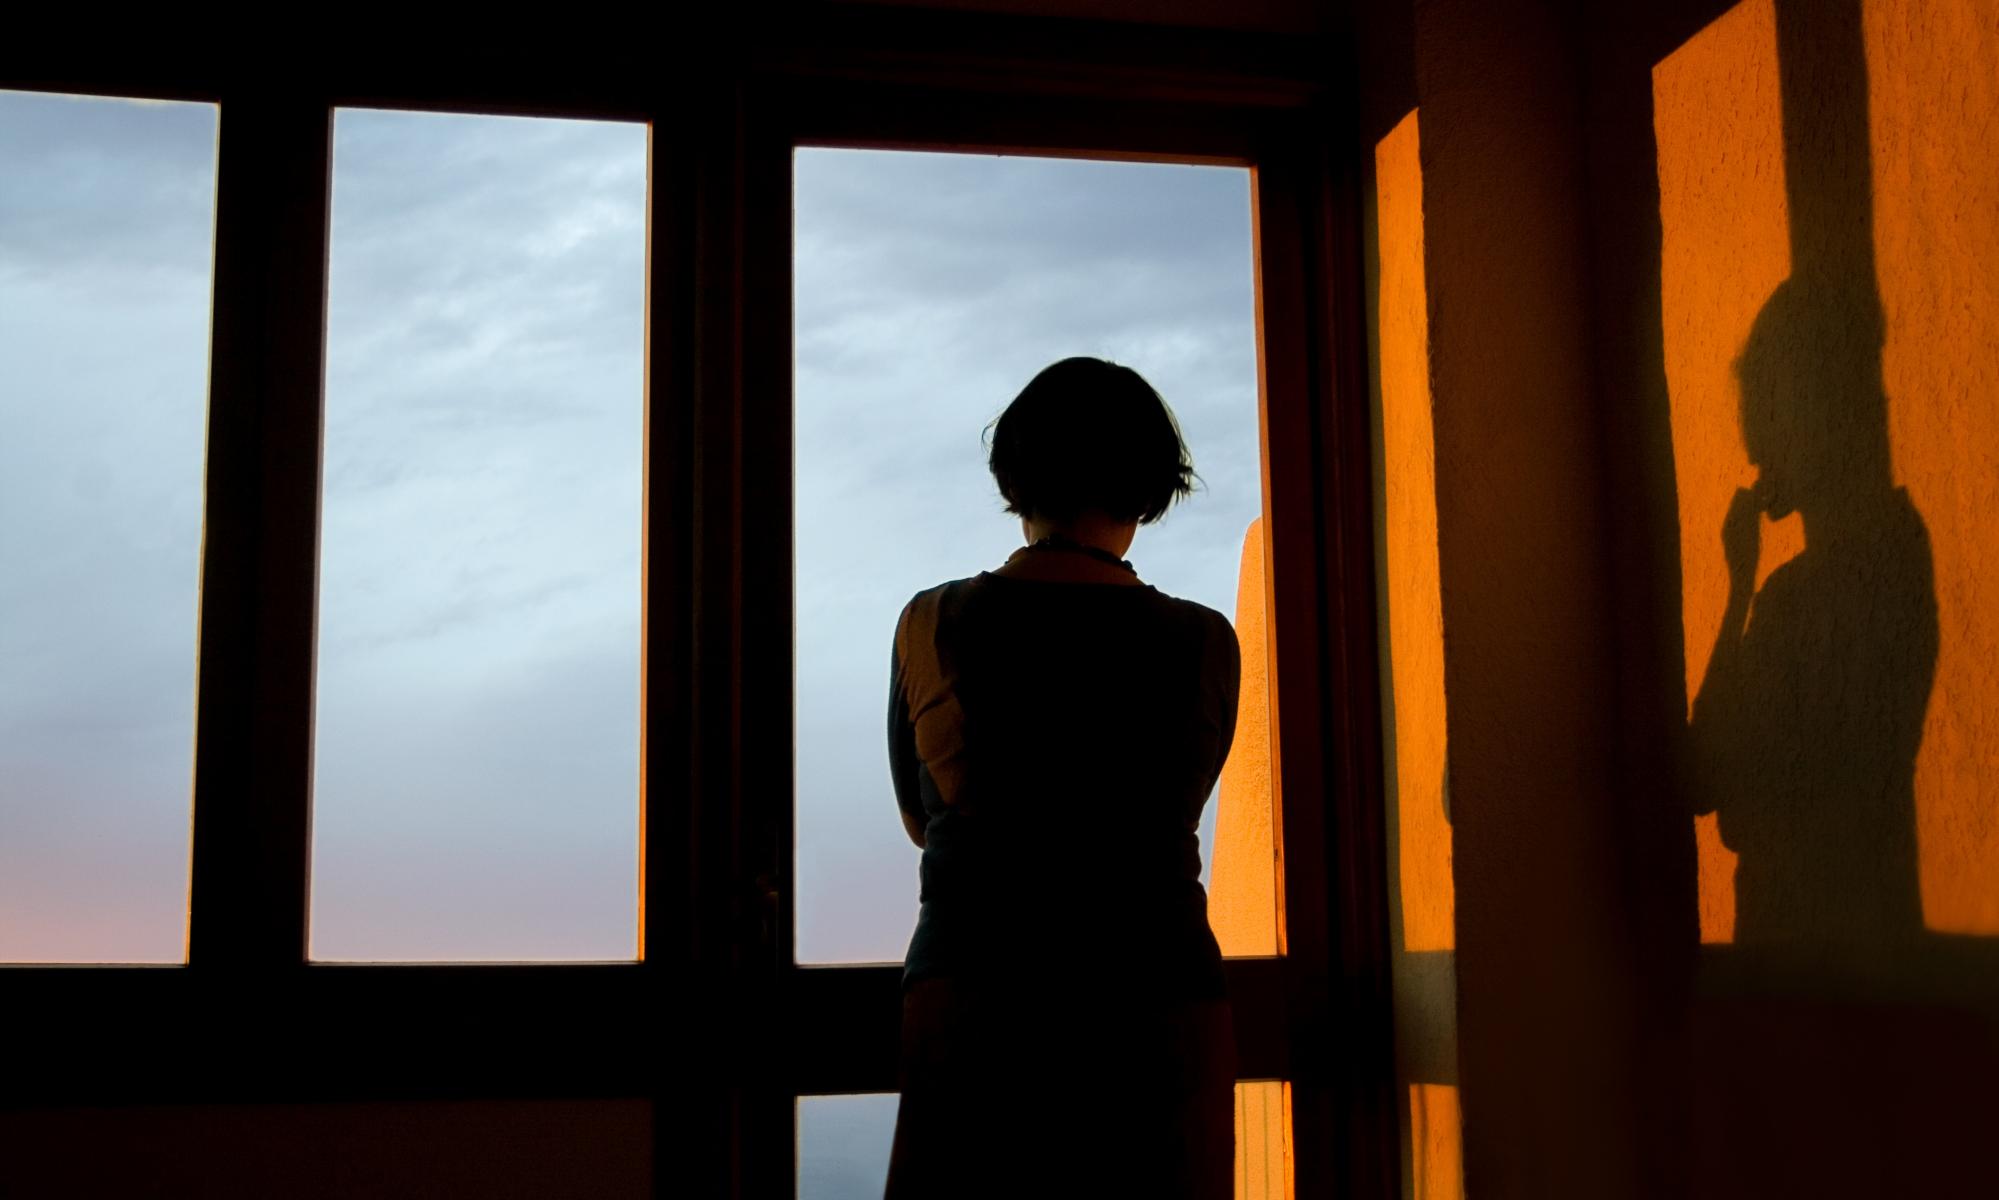 perimenopausal women have 40% higher risk of depression, study suggests